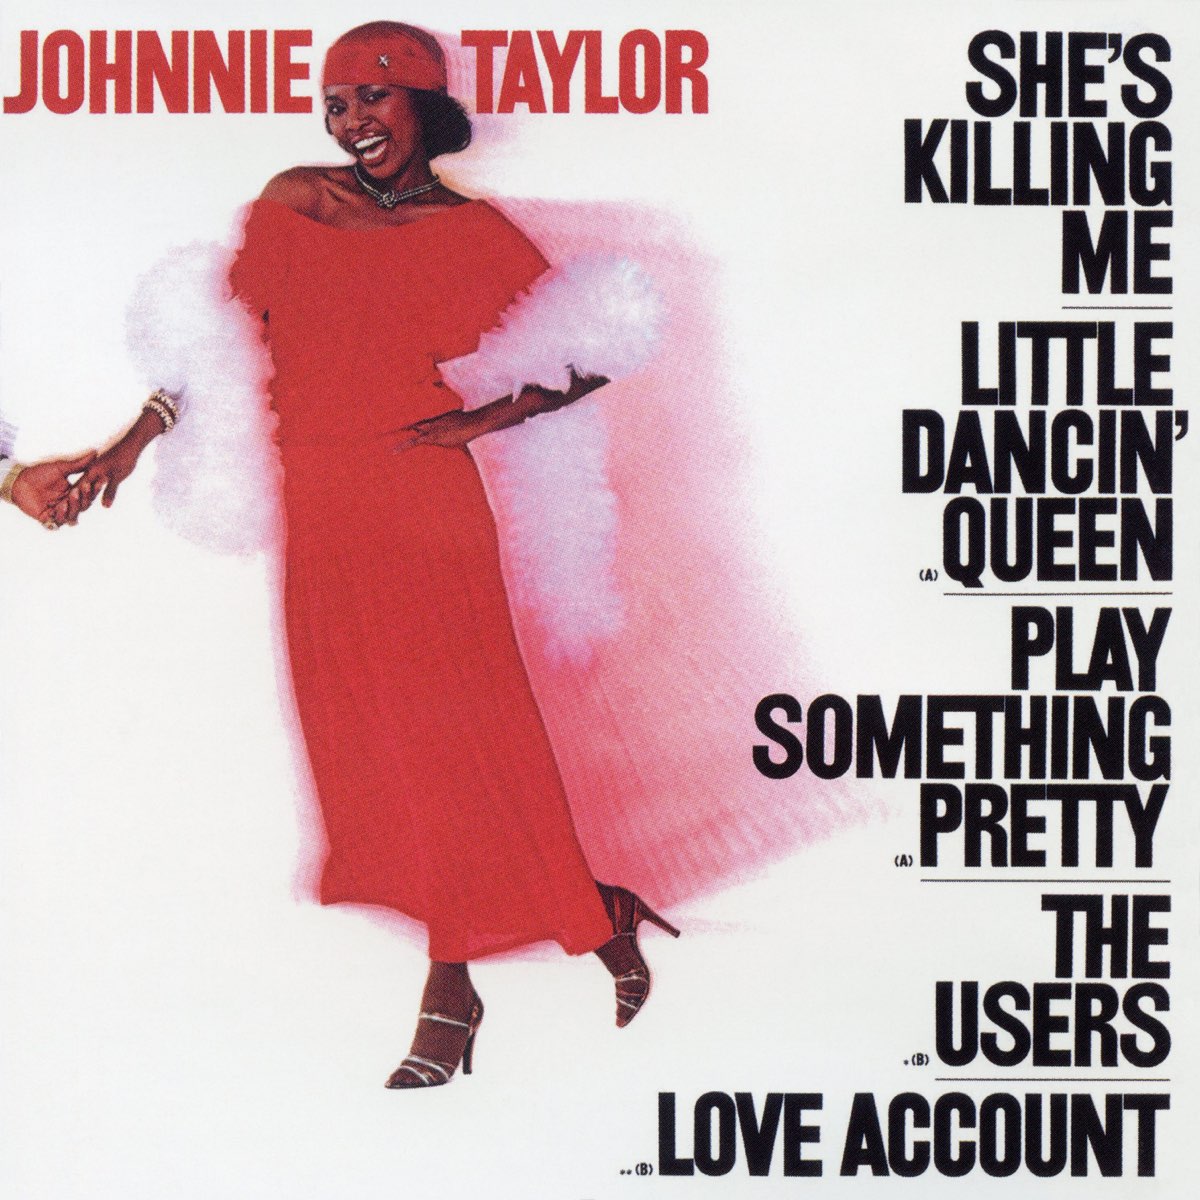 She killer. Альбомы Queen something to Love. Chame un Danc Queen. Песня the something Queen. Johnnie Taylor.1981 / Damaris Carbaugh.1983 what about my Love Mix.